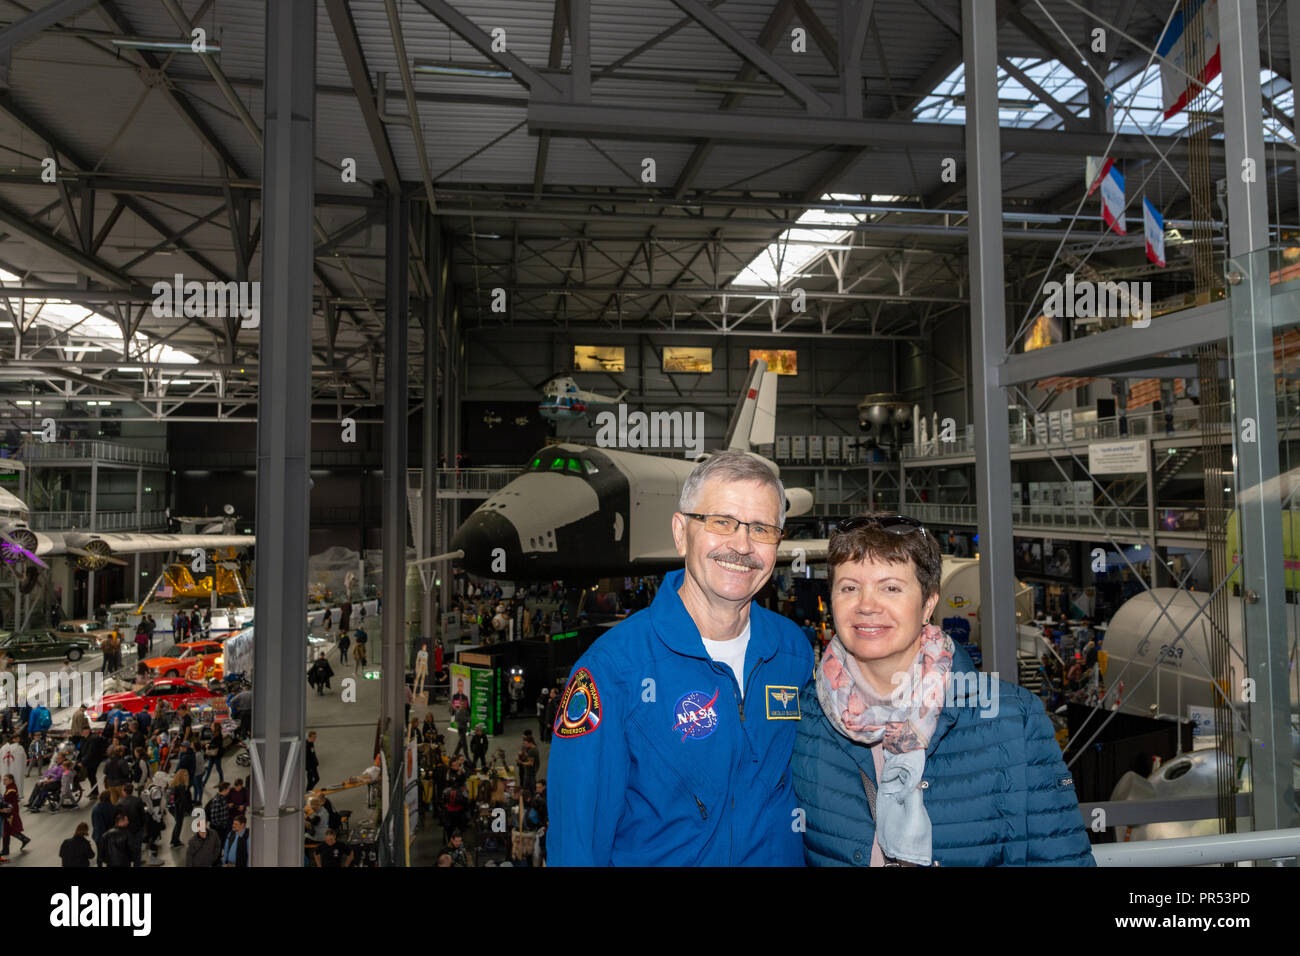 Speyer, Germany. 29th Sept 2018.  Cosmonaut Nikolai Budarin takes a tour of the exhibition during his visit at Technik Museum Speyer, Germany. With his wife (right) Credit: Markus Wissmann/Alamy Live News Stock Photo